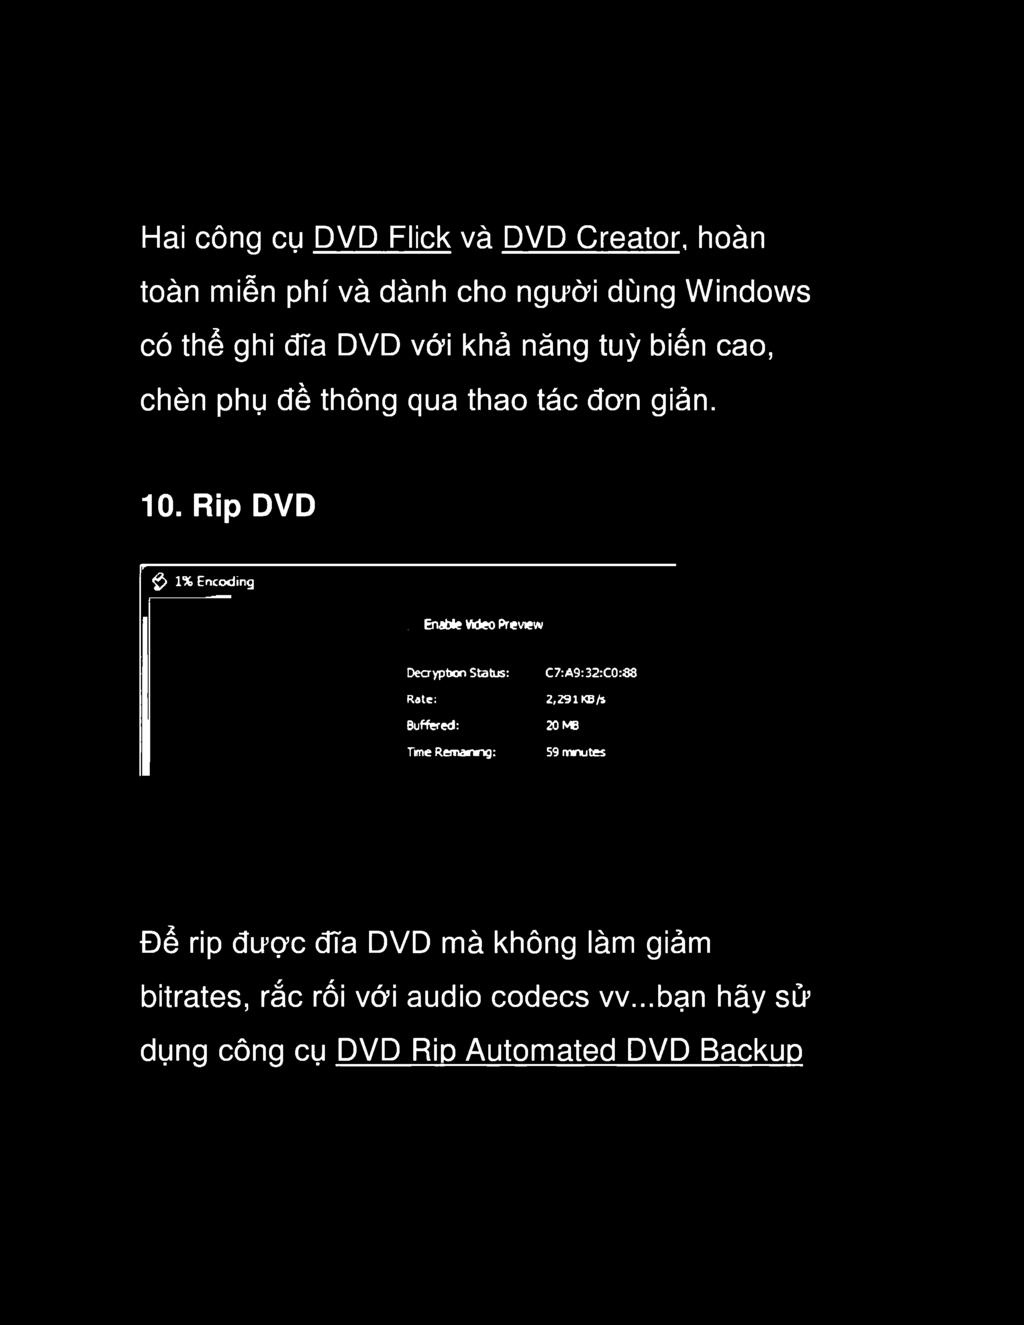 Rip DVD r ộ 1% Encoding 0 Enable Vdeo Preview Decryption Status: Rate; Buffered: Time Remamng: C7:A9:32:C0:88